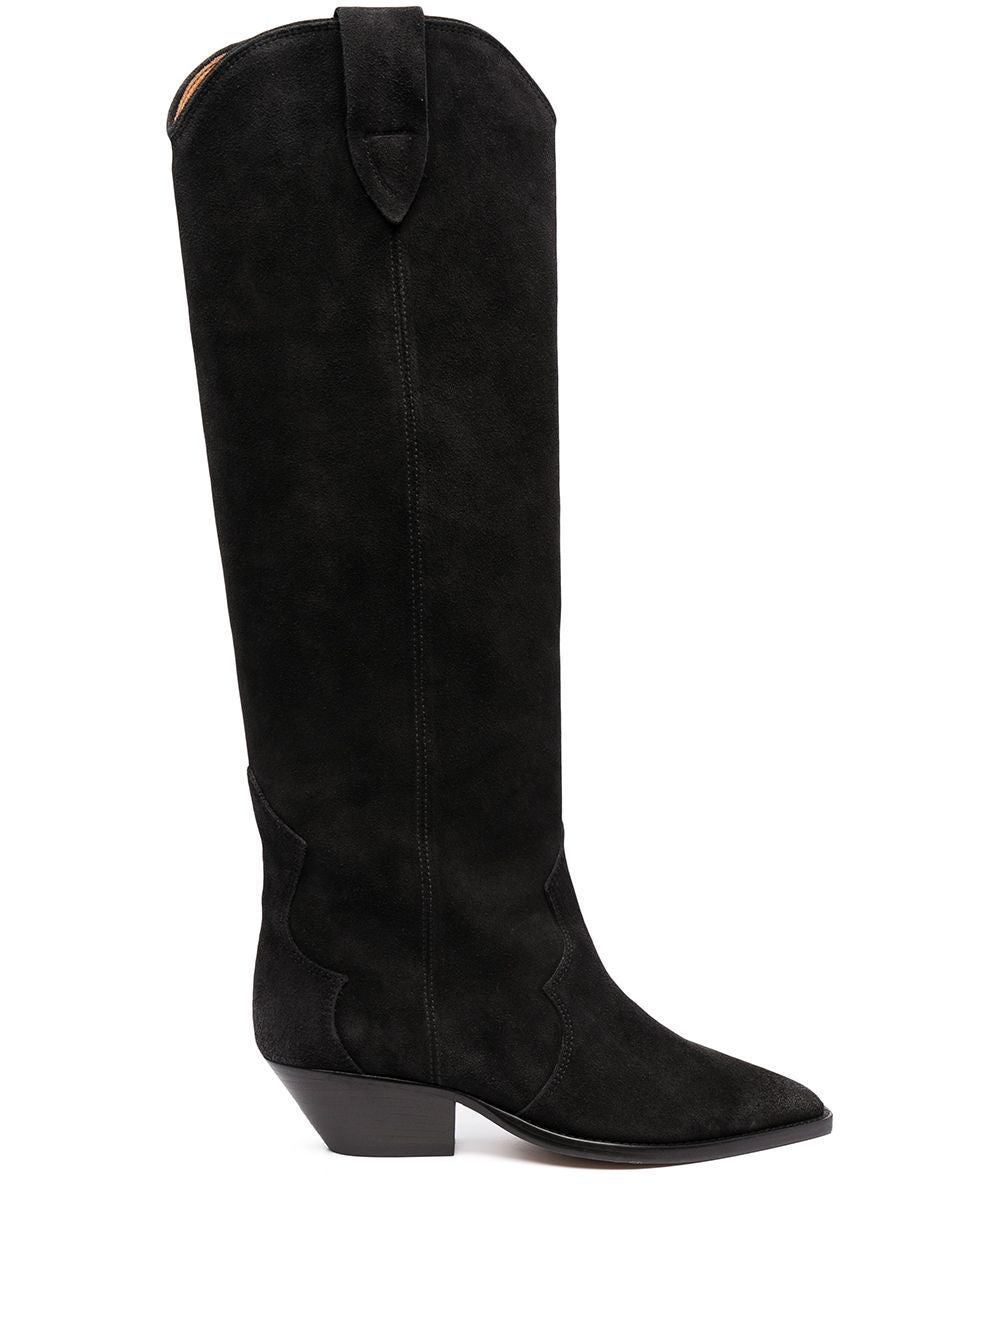 ISABEL MARANT Sleek and Luxurious Black Leather Ankle Boots for Women